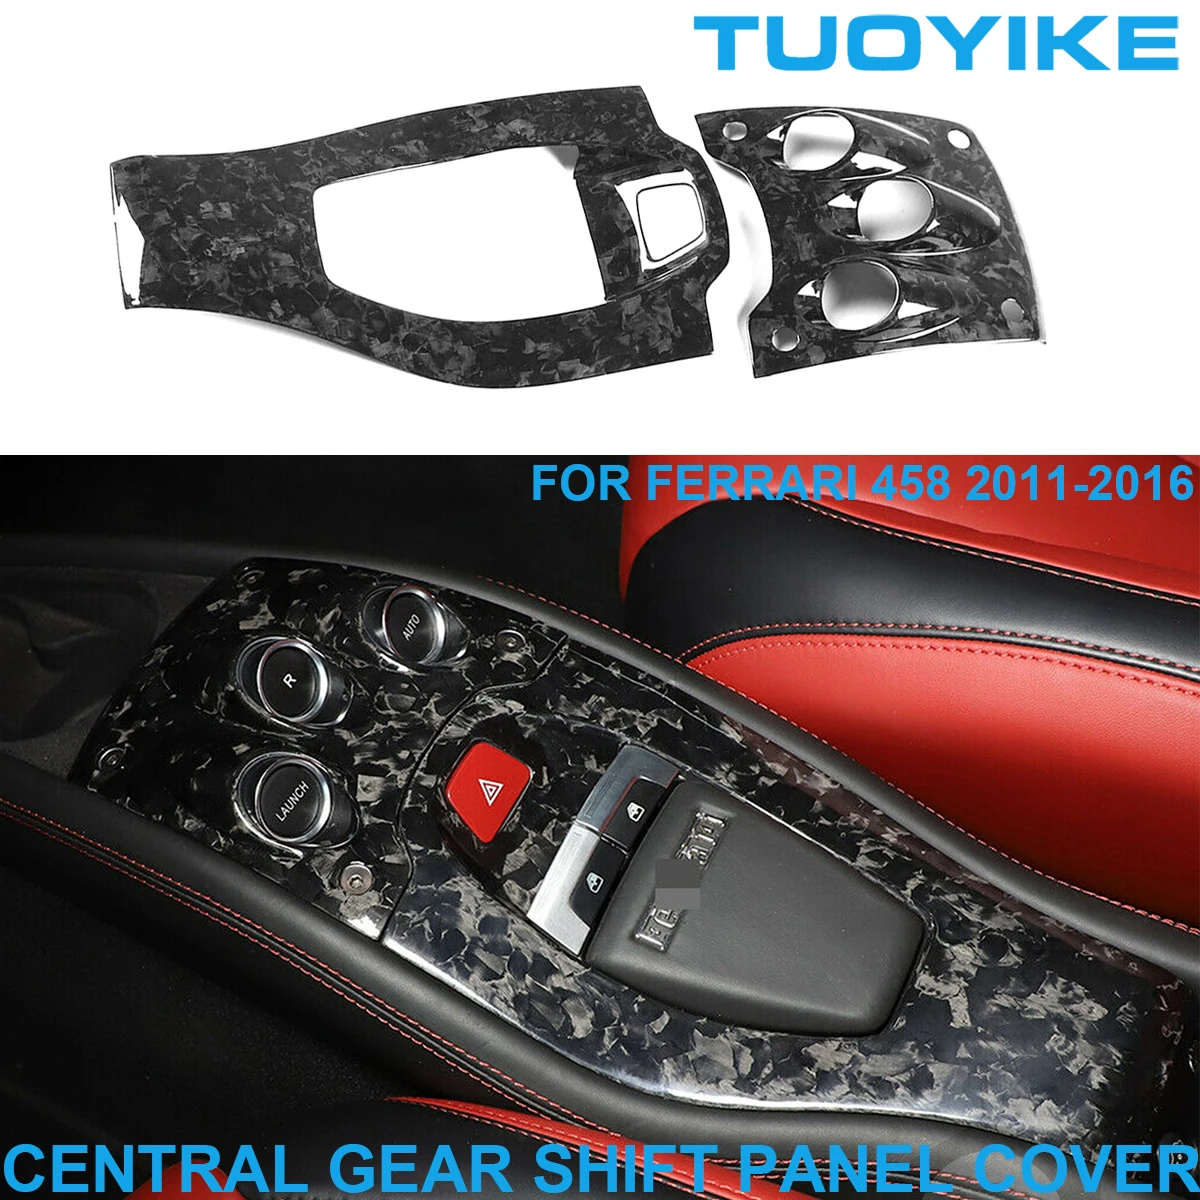 

Car Real Forged Carbon Fiber Interior Central Console Gear Shift Panel Cover Switch Button Trim For Ferrari F458 458 2011-2016